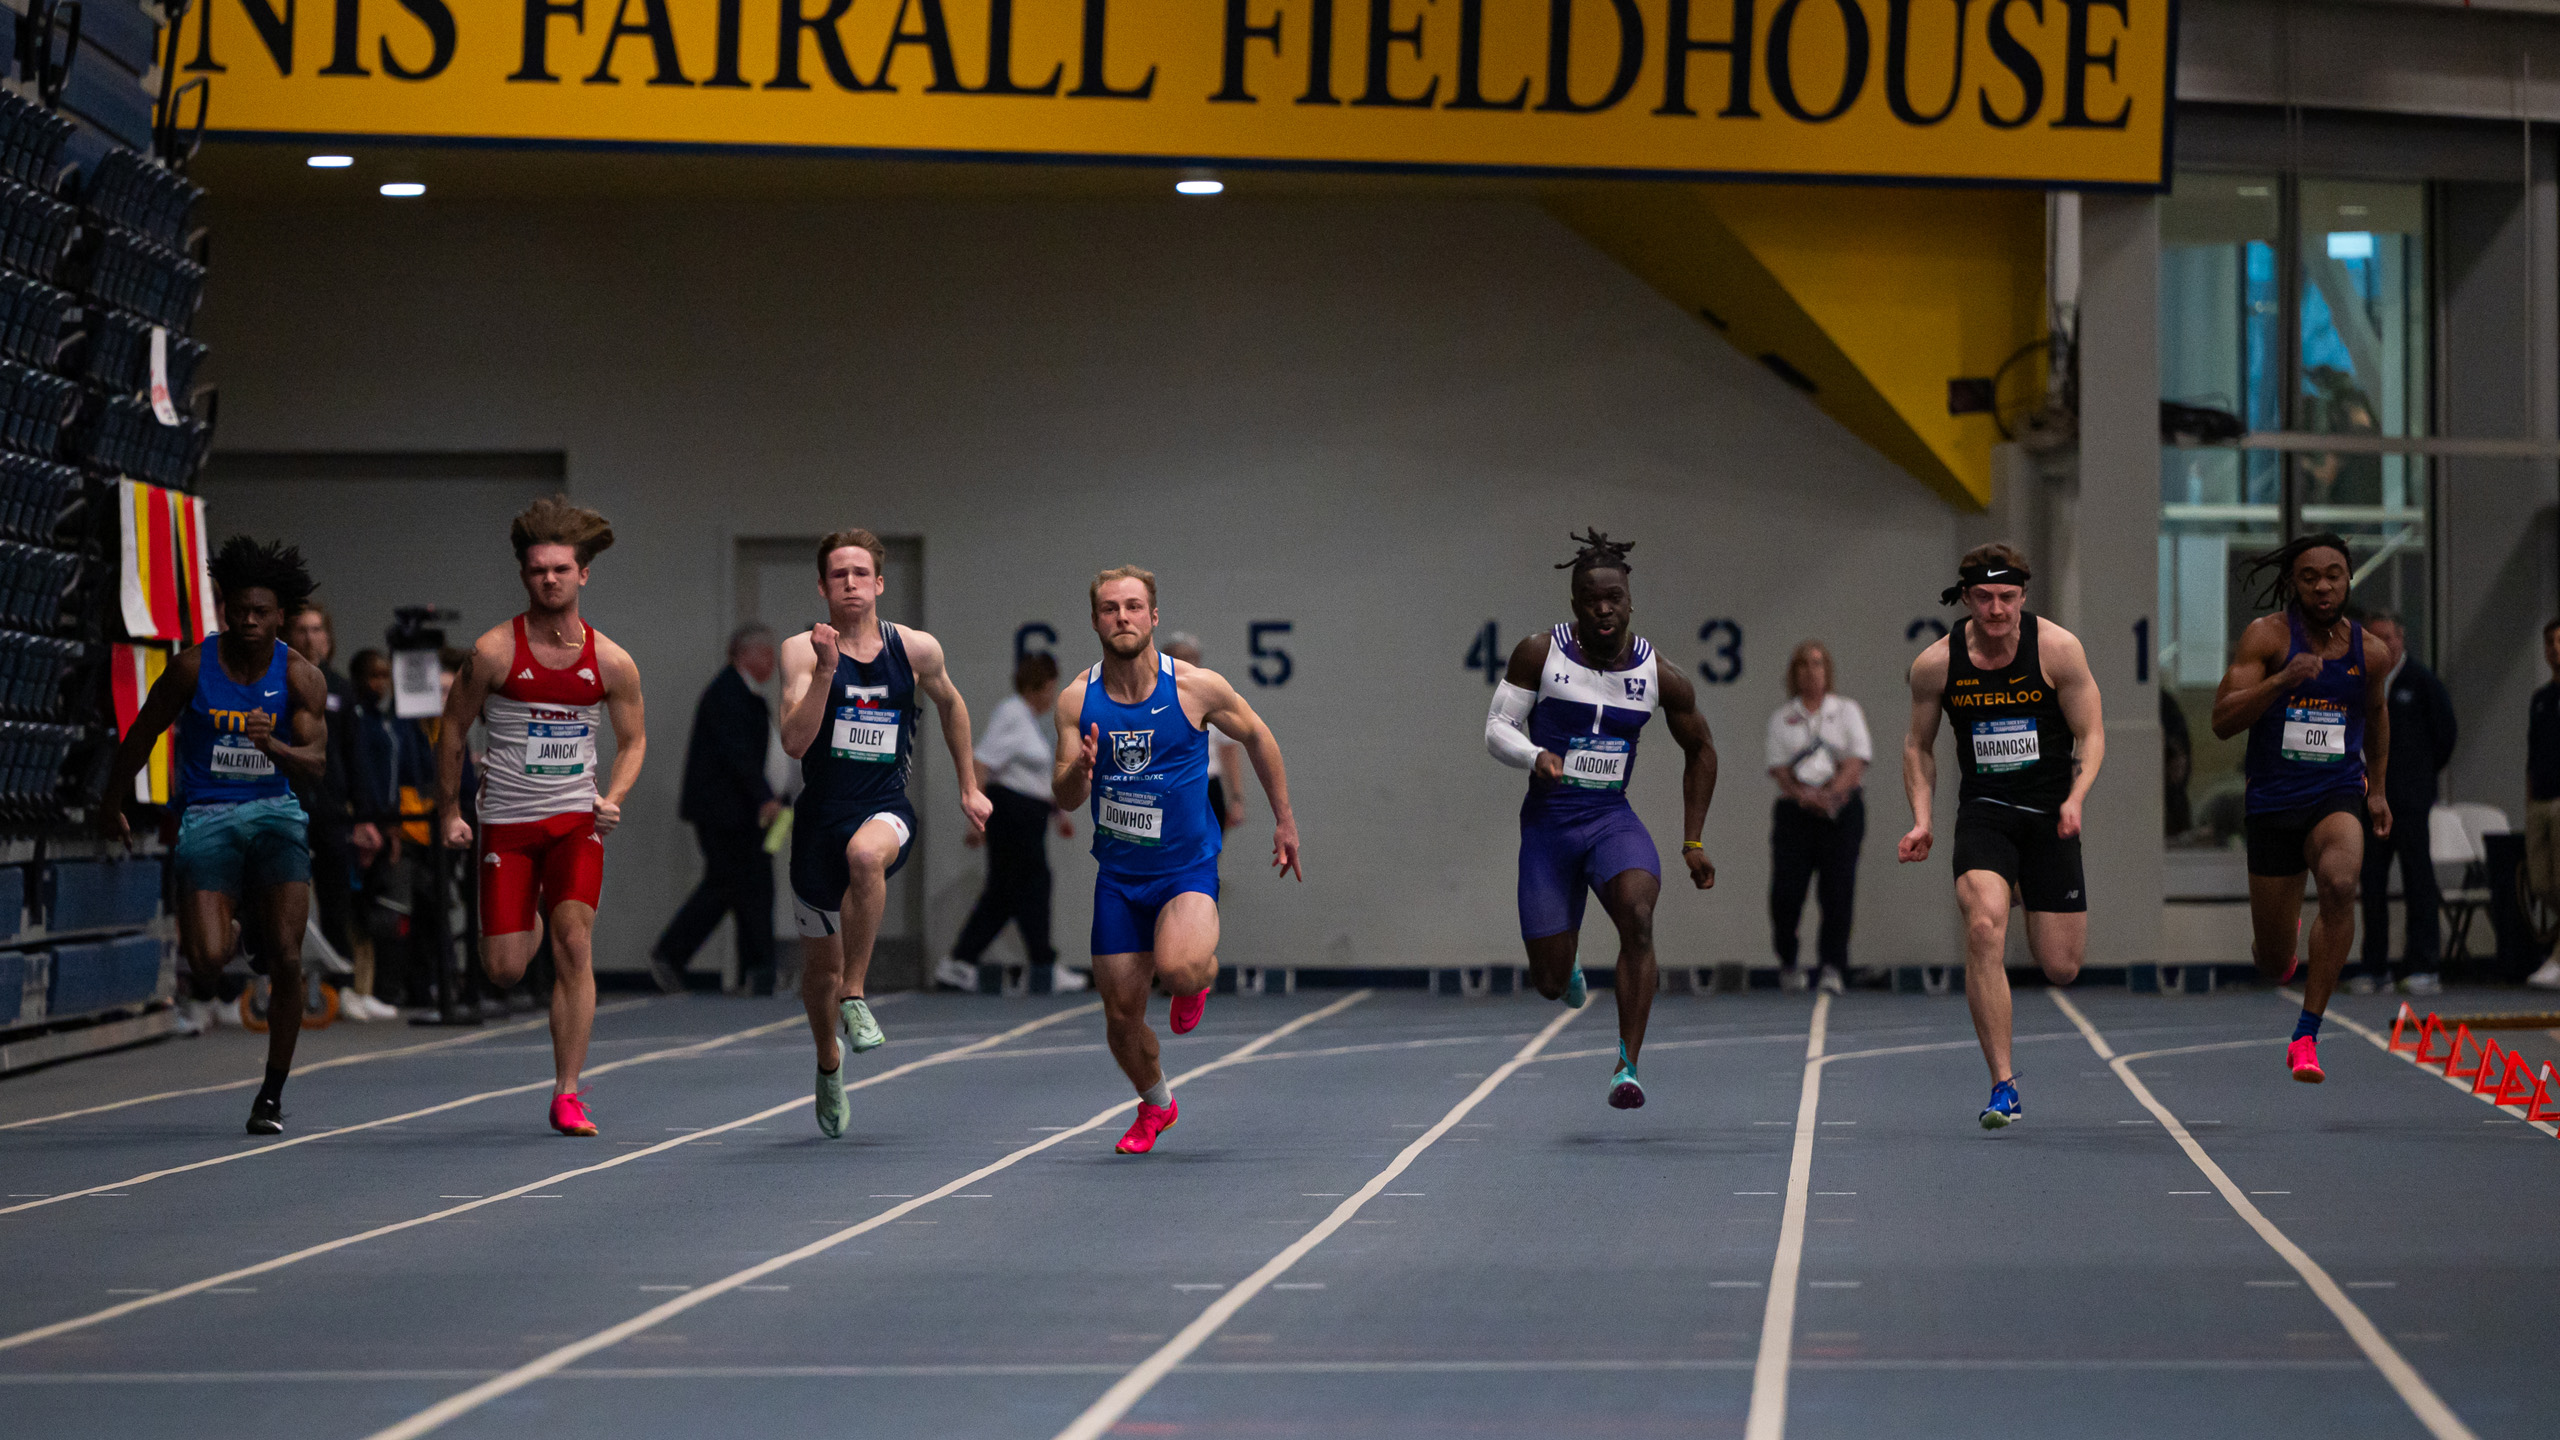 Seven track and field athletes race